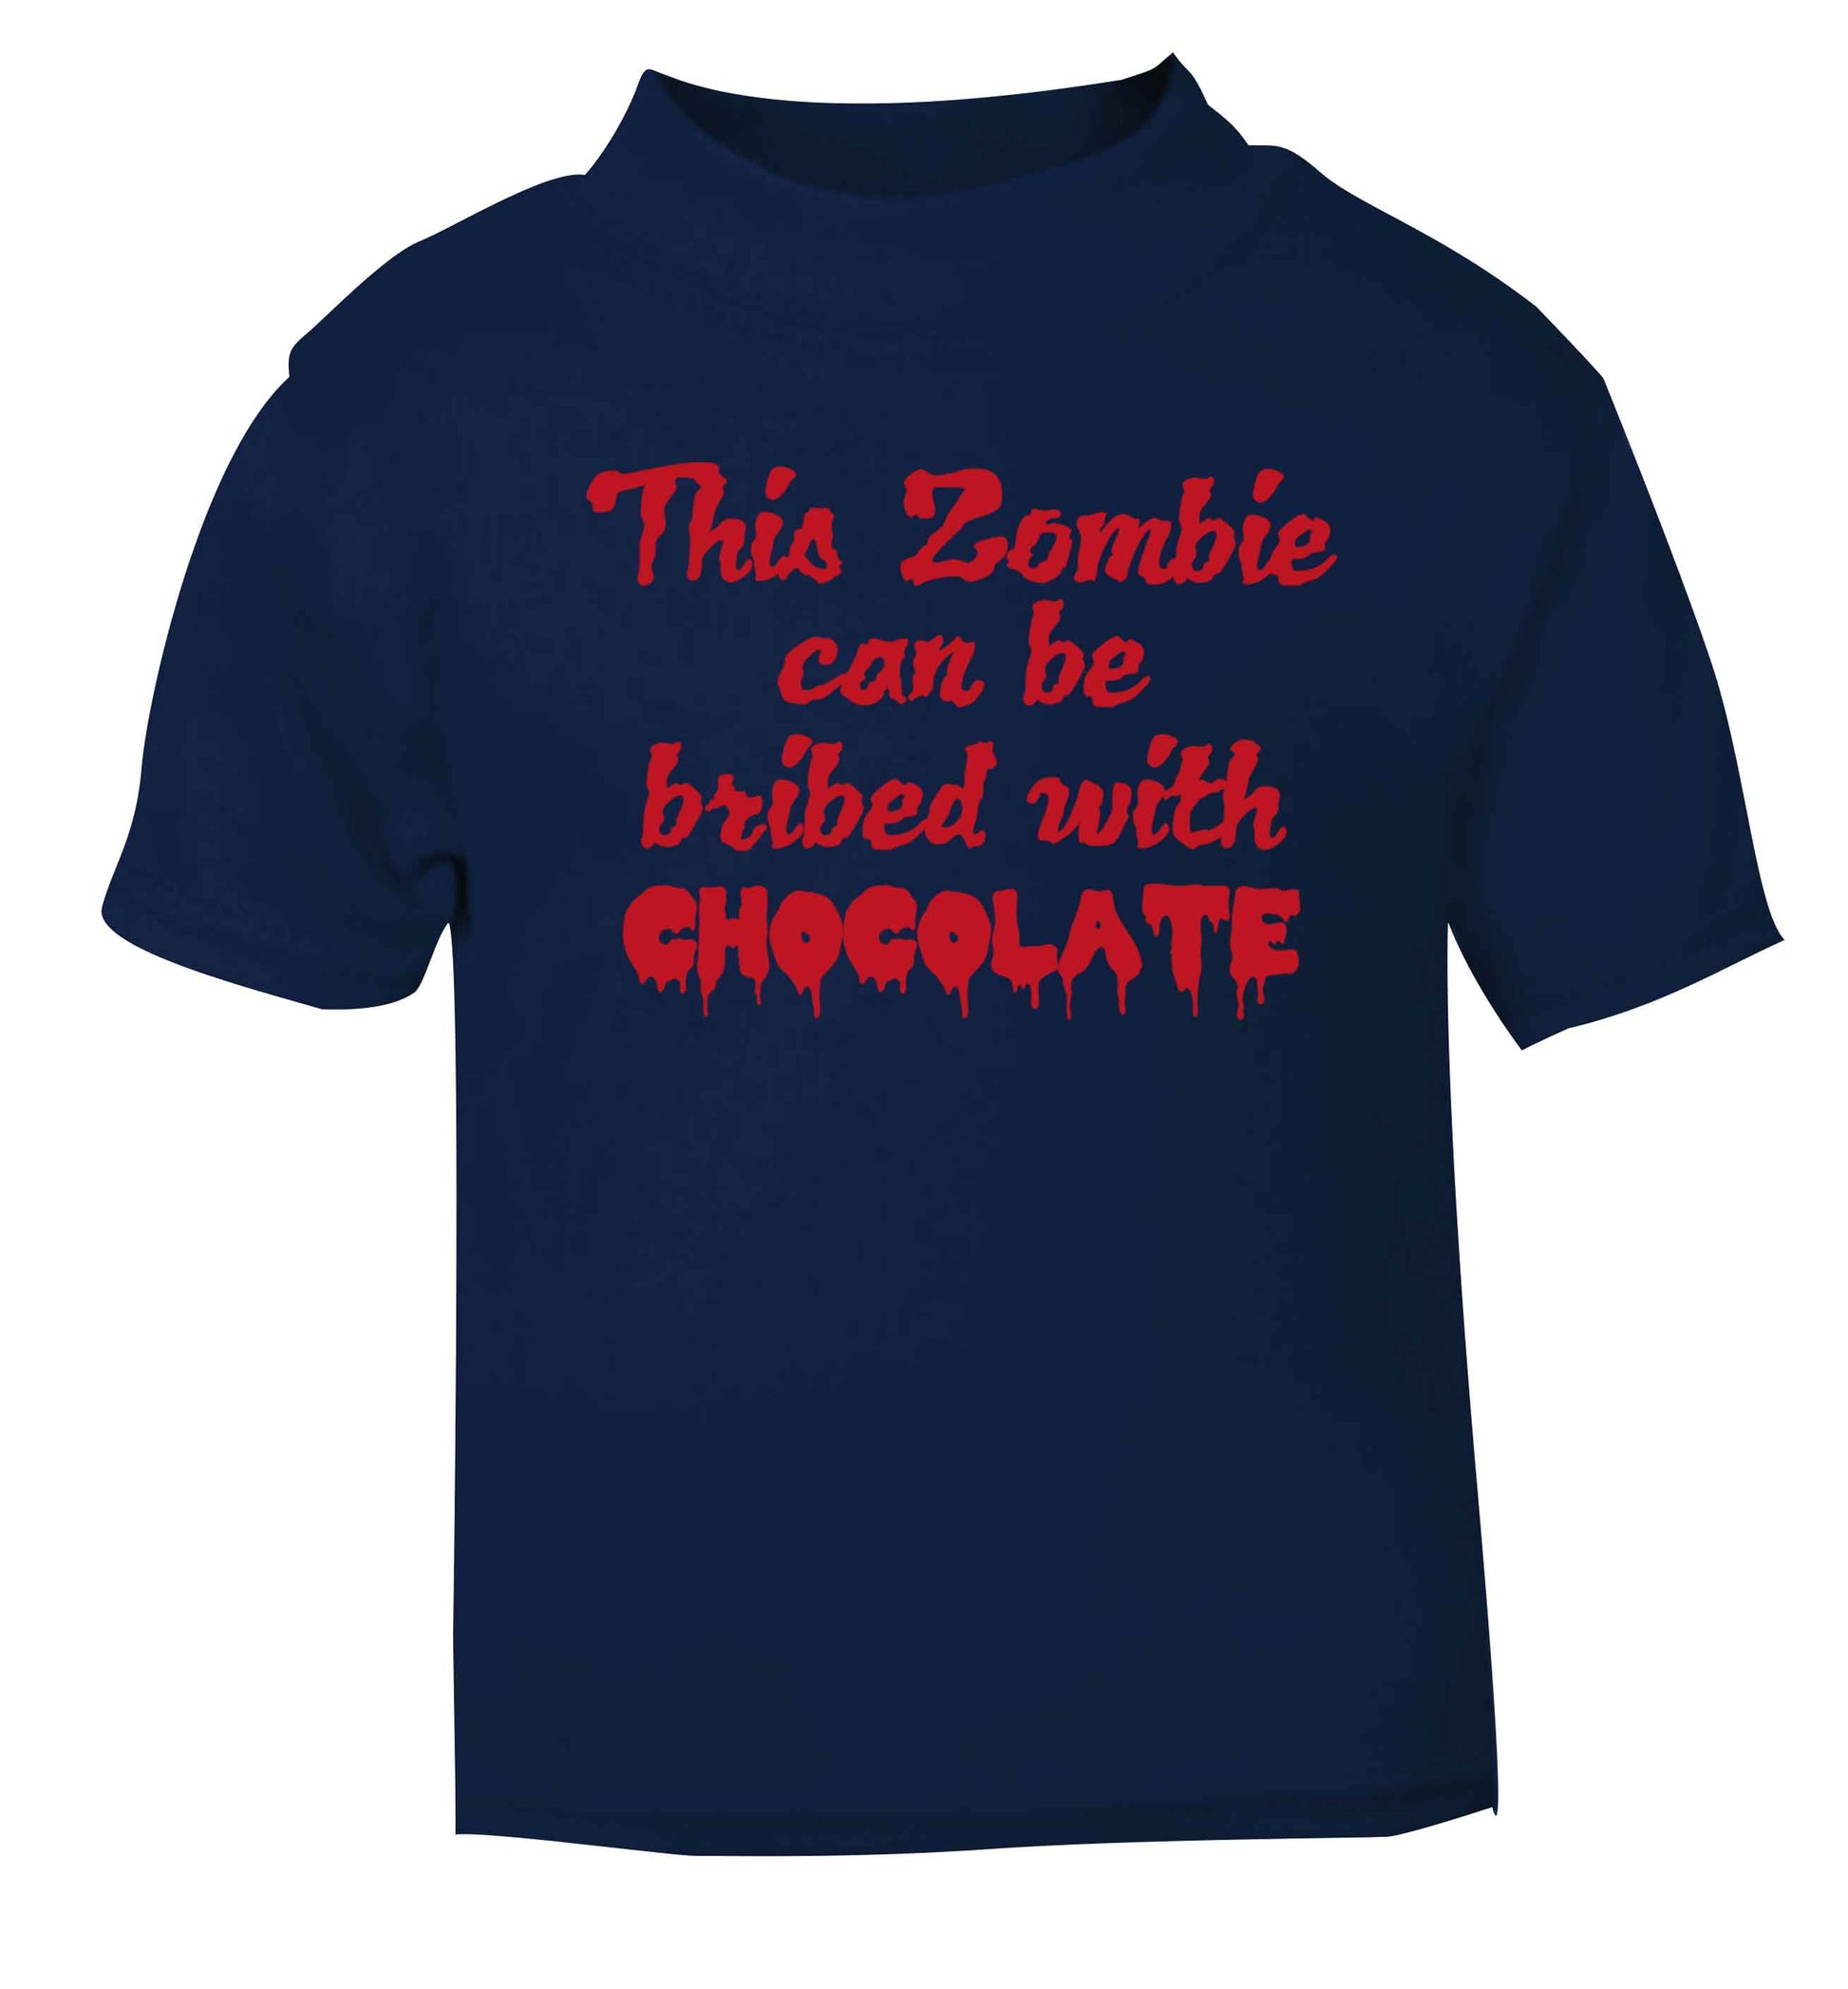 This zombie can be bribed with chocolate navy baby toddler Tshirt 2 Years